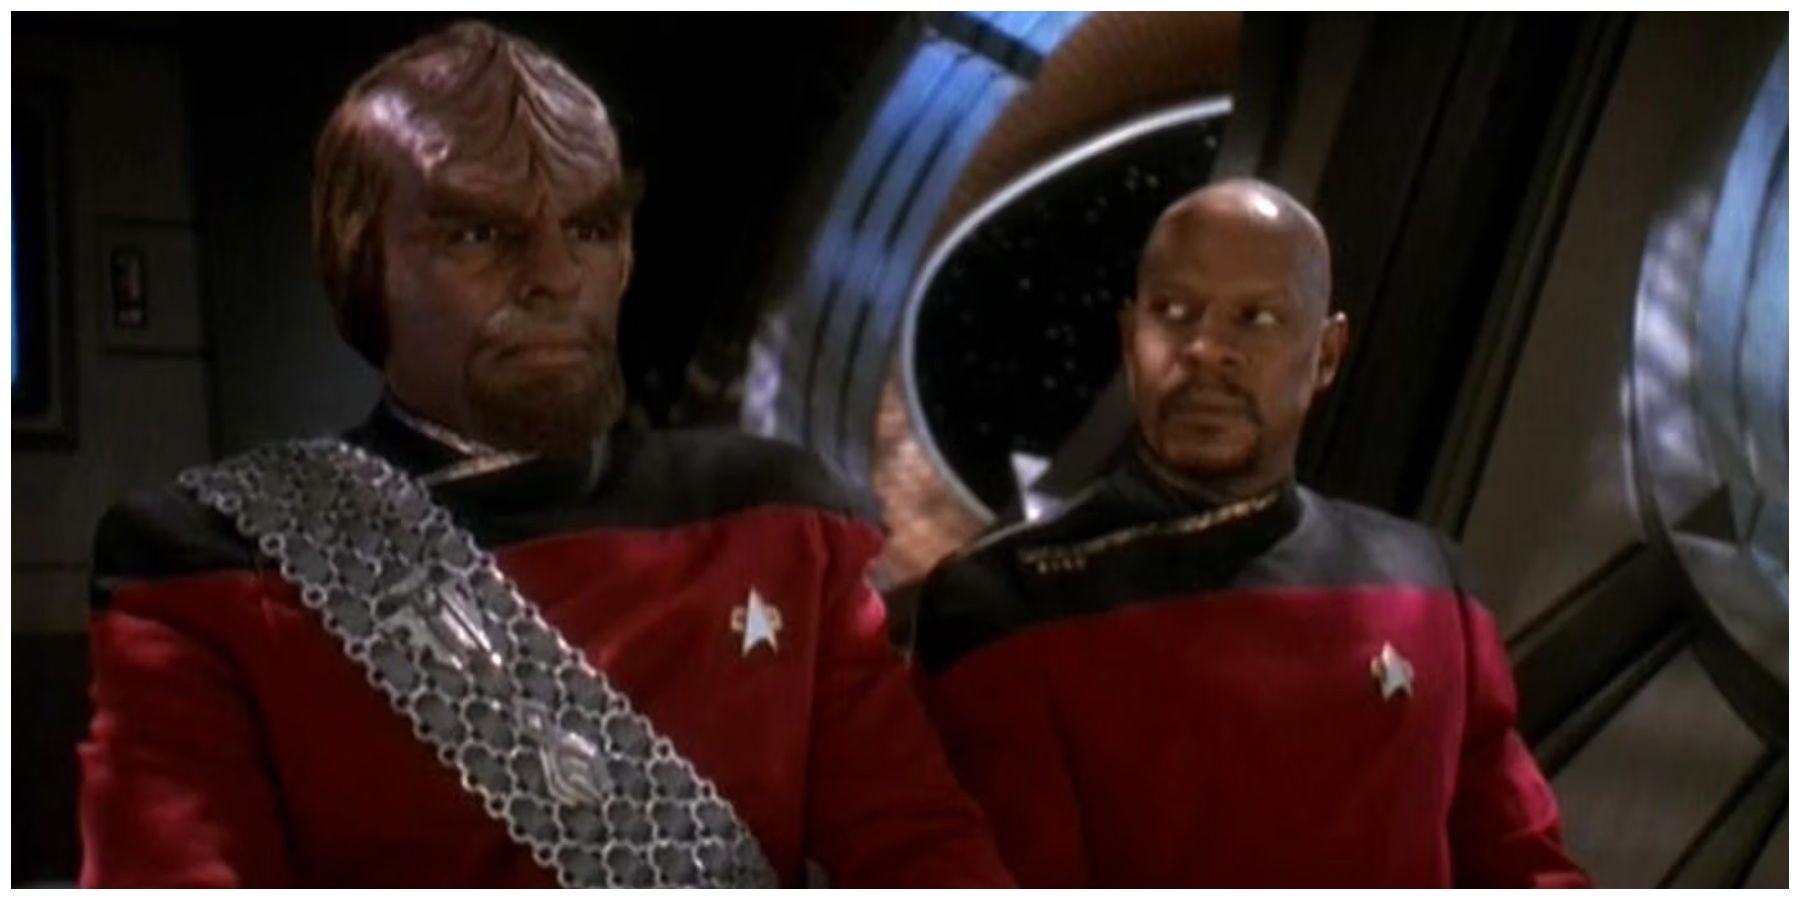 Michael Dorn, a Black man, in Klingon makeup that gives him a ridged forehead from browline to the top of his head and a brown goatee, stands in his red Starfleet uniform and silver warrior's sash next to Avery Brooks, a Black man who is bald with a brown goatee., also wearing a red Starfleet uniform. Avery is looking at Dorn with a serious expression.